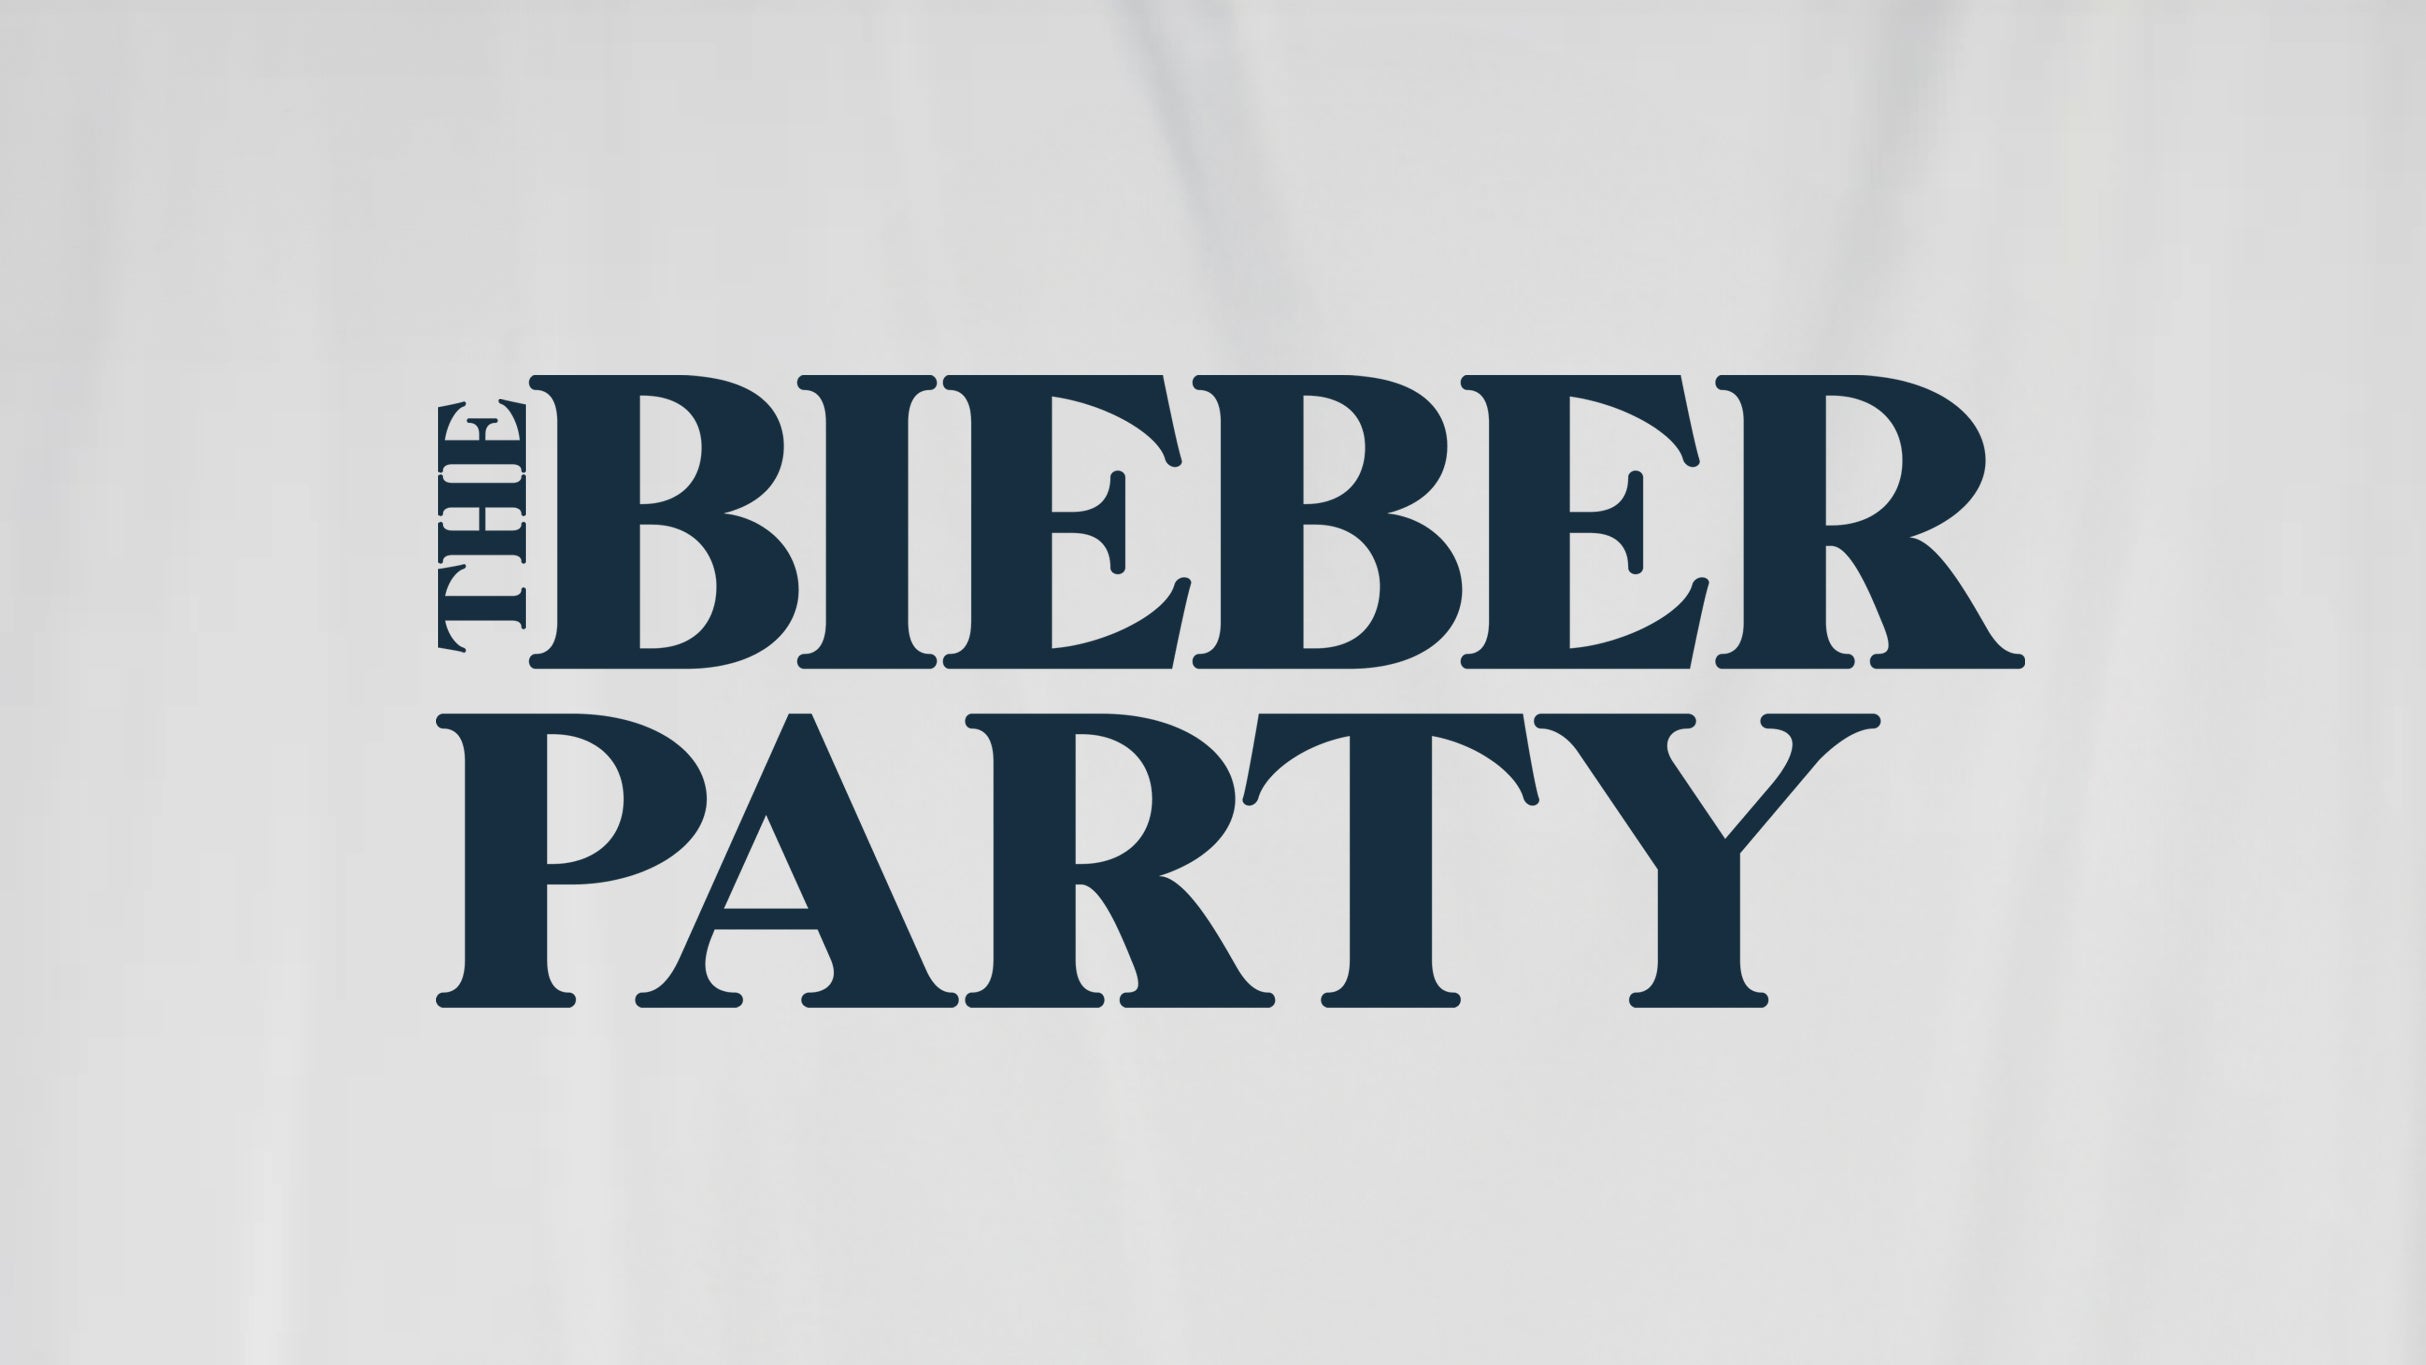 The Bieber Party: Justin Bieber Night (18+) in Pittsburgh promo photo for Artist presale offer code